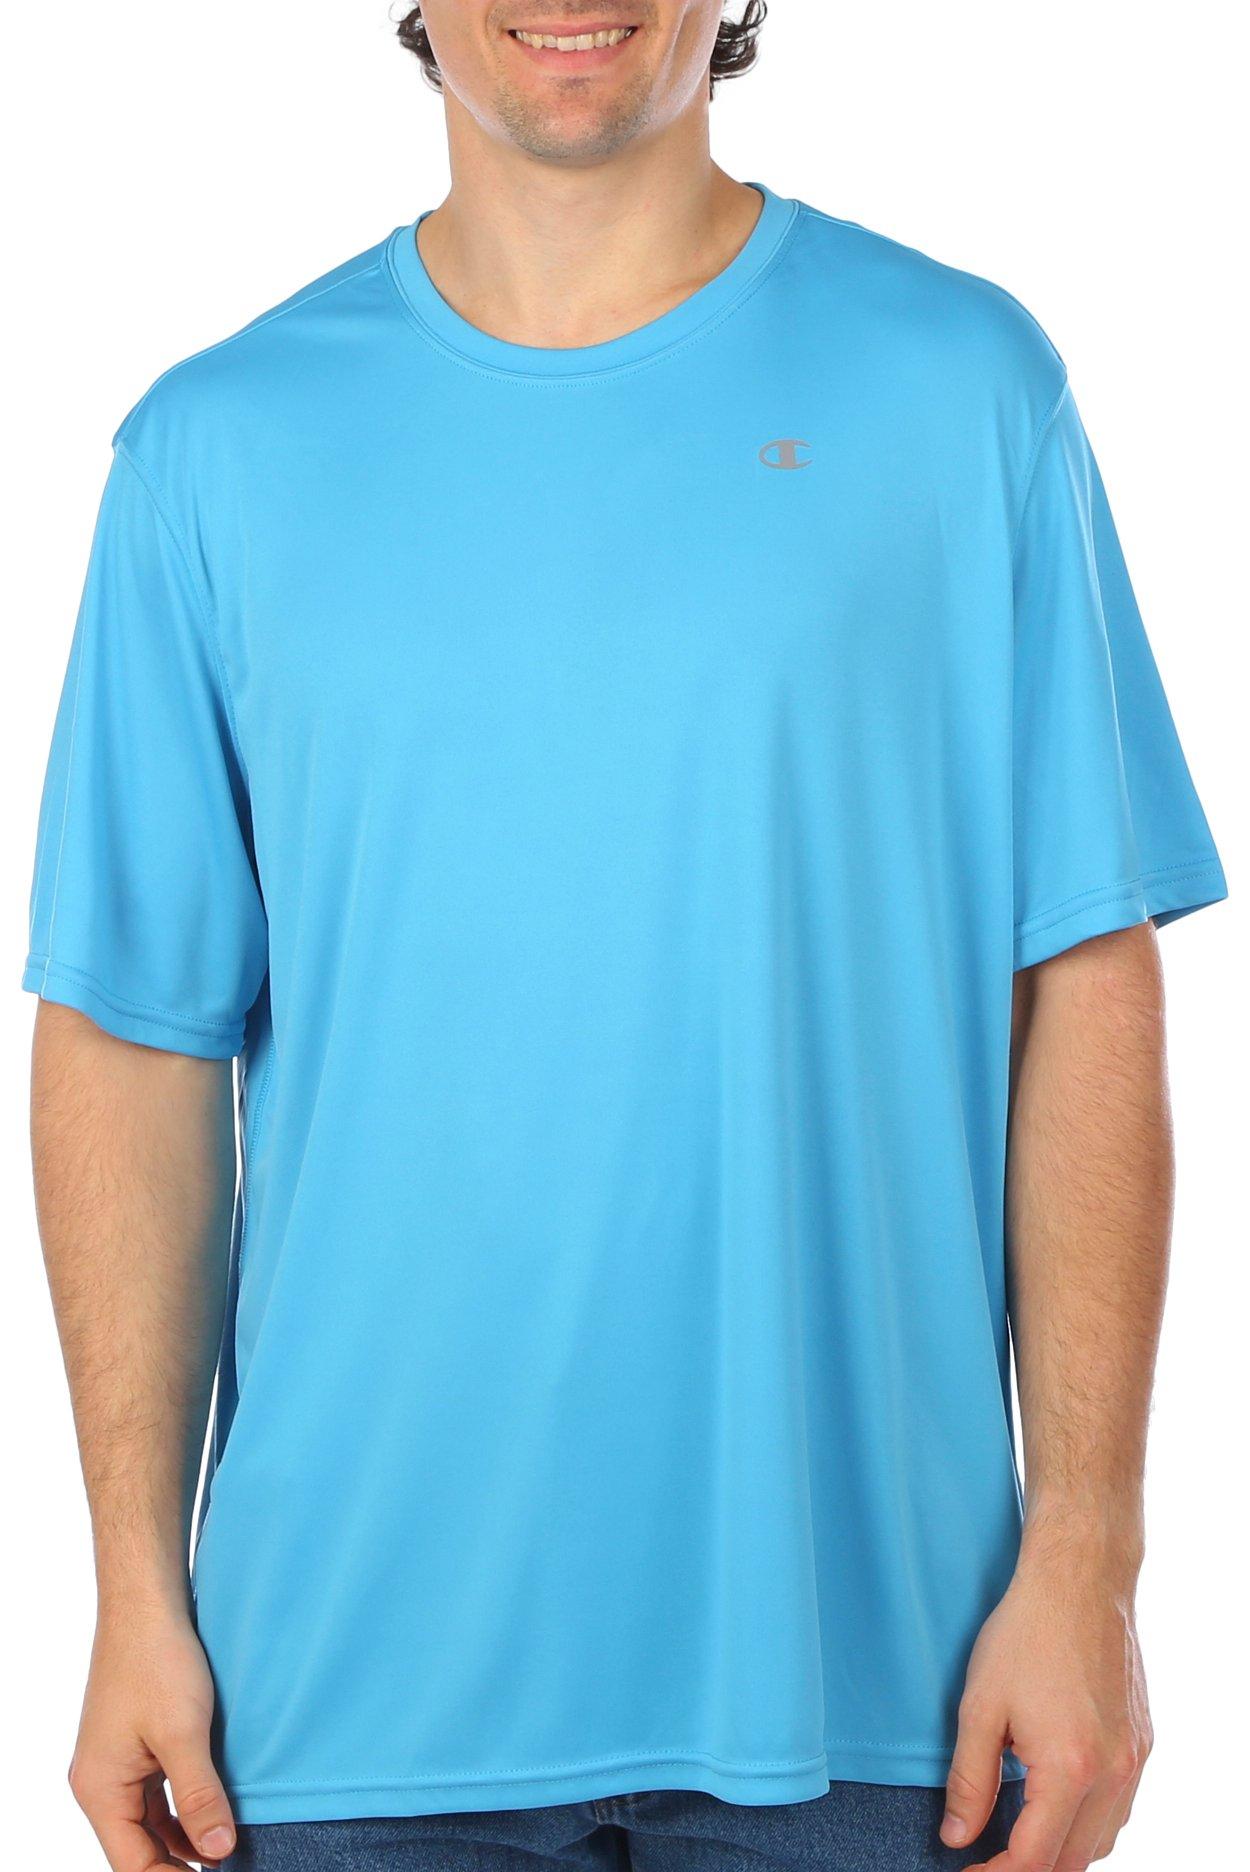 Champion Mens Double Dry Small Chest Logo Athletic